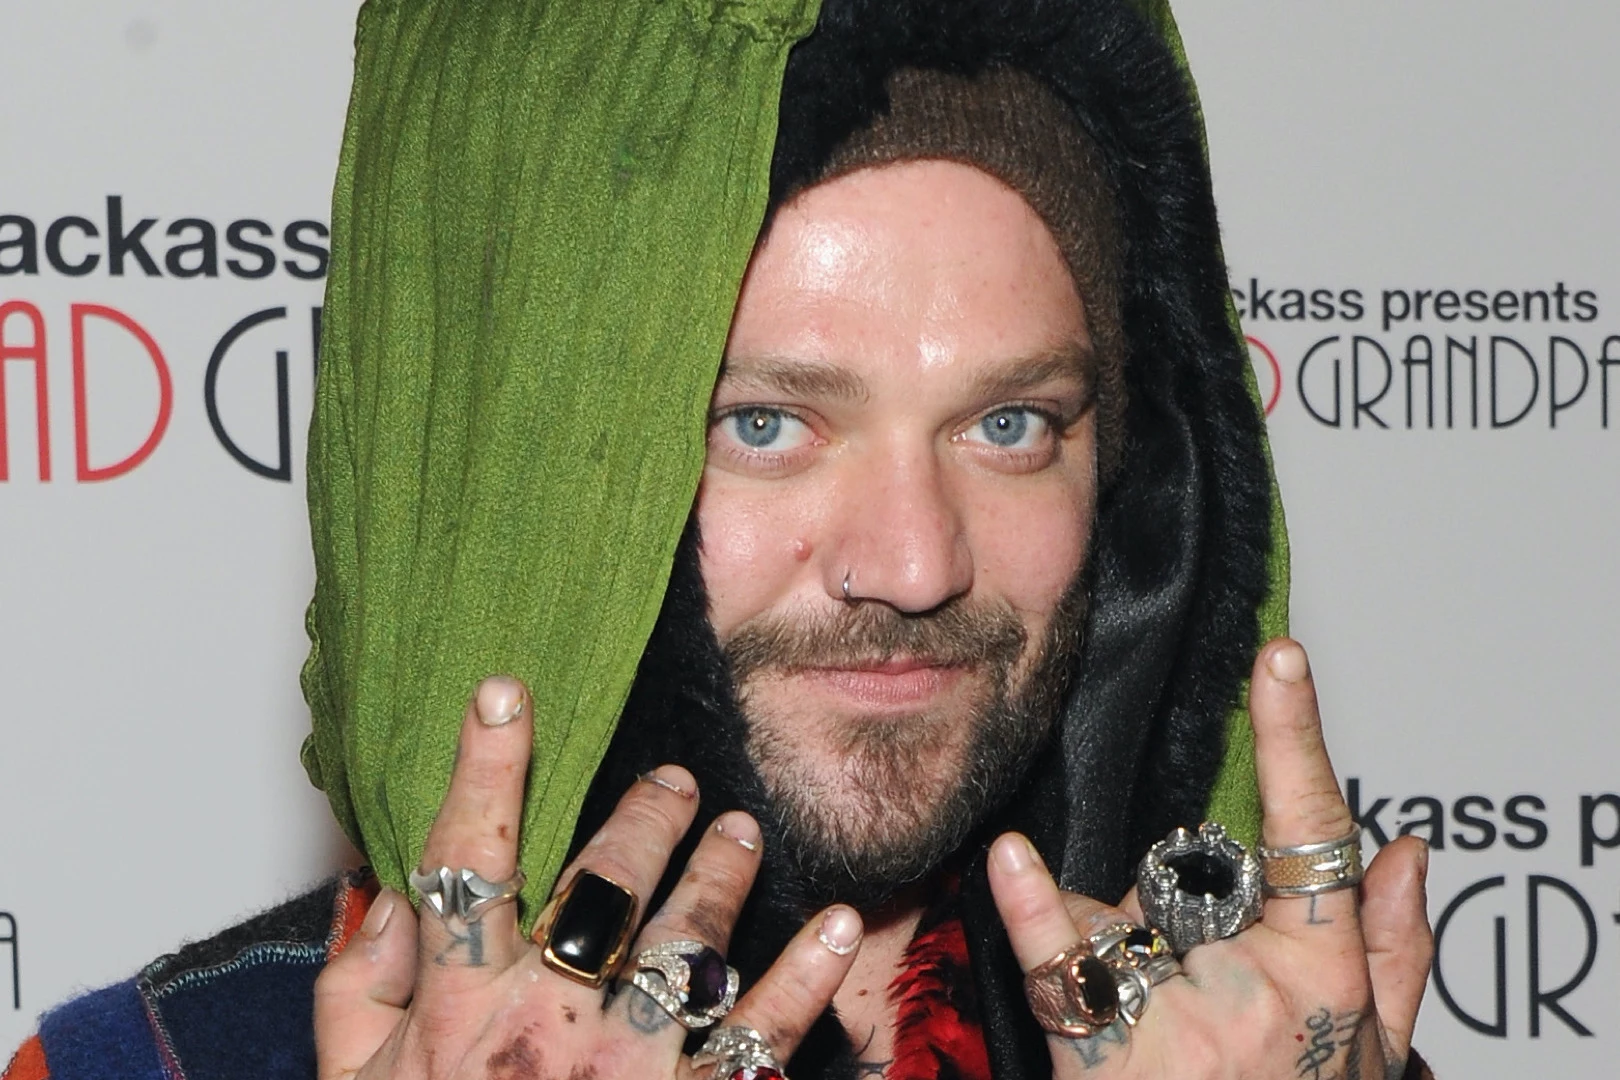 Bam Margera Found After Going Missing From Rehab Facility